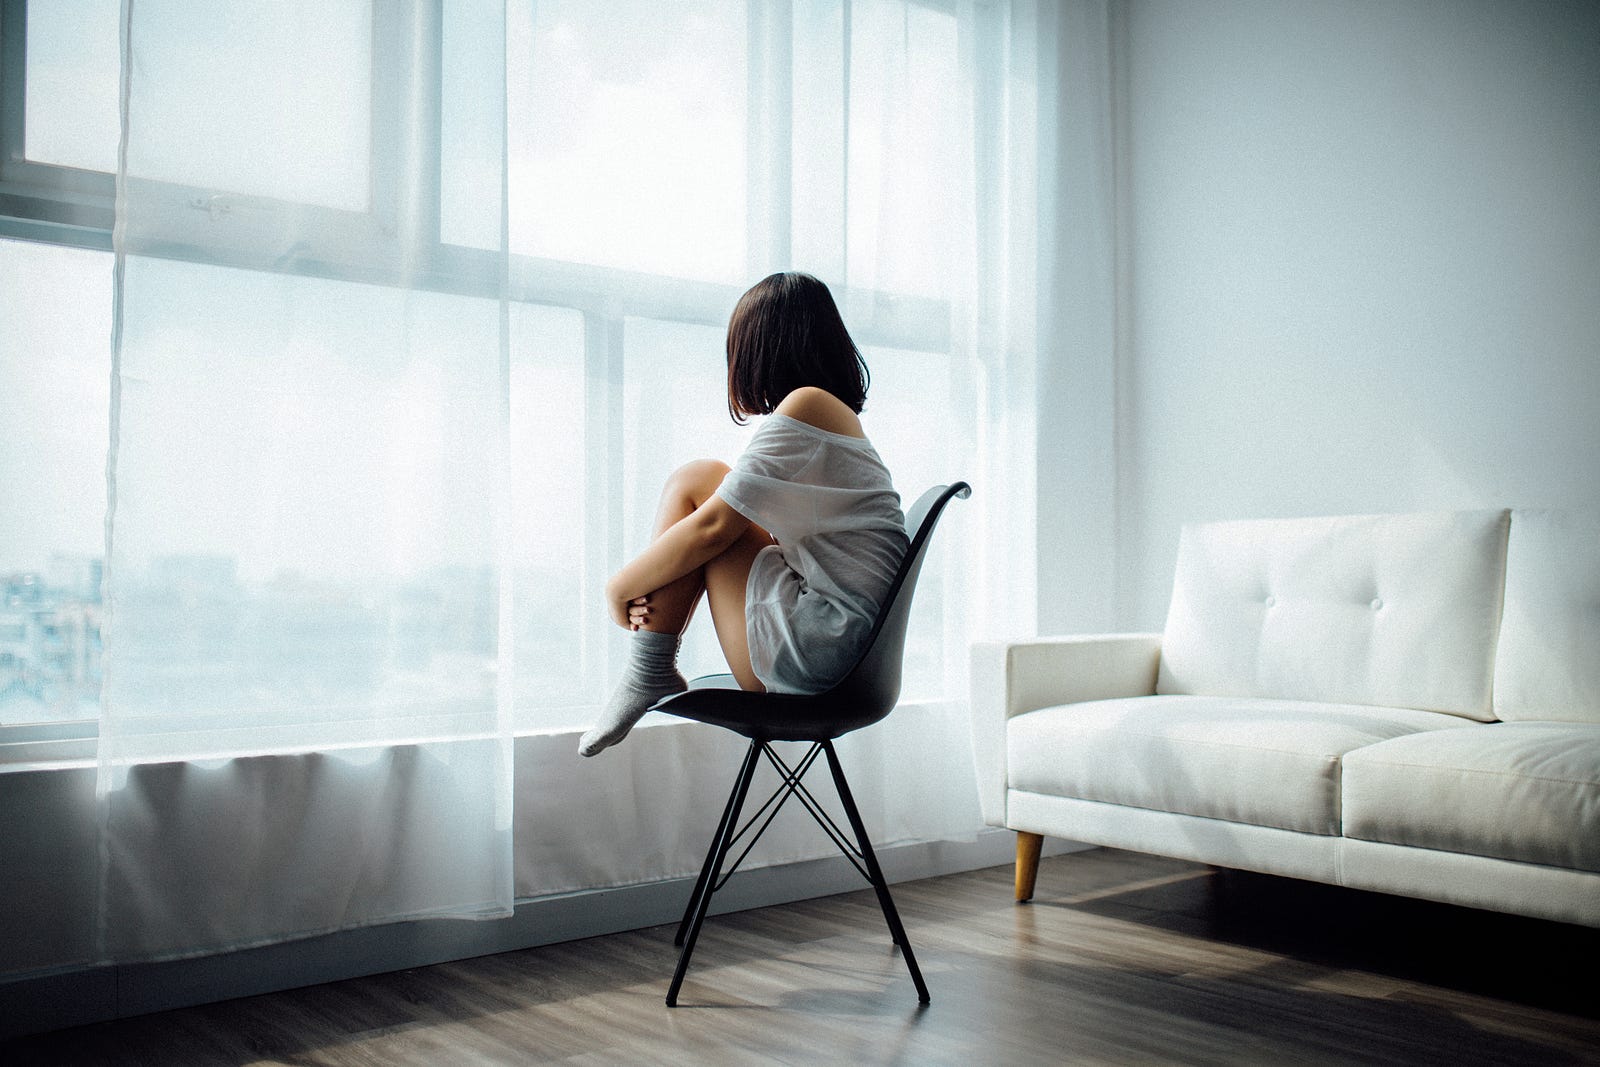 A young brunette woman gazes out of the window of a light filled room. She is curled up in a chair, knees up to her chest. If rTMS (repetitiive trascranial magnetic stimulation) is effective for you, depression symptoms may improve (or resolve). Symptom relief may take a few weeks of treatment.